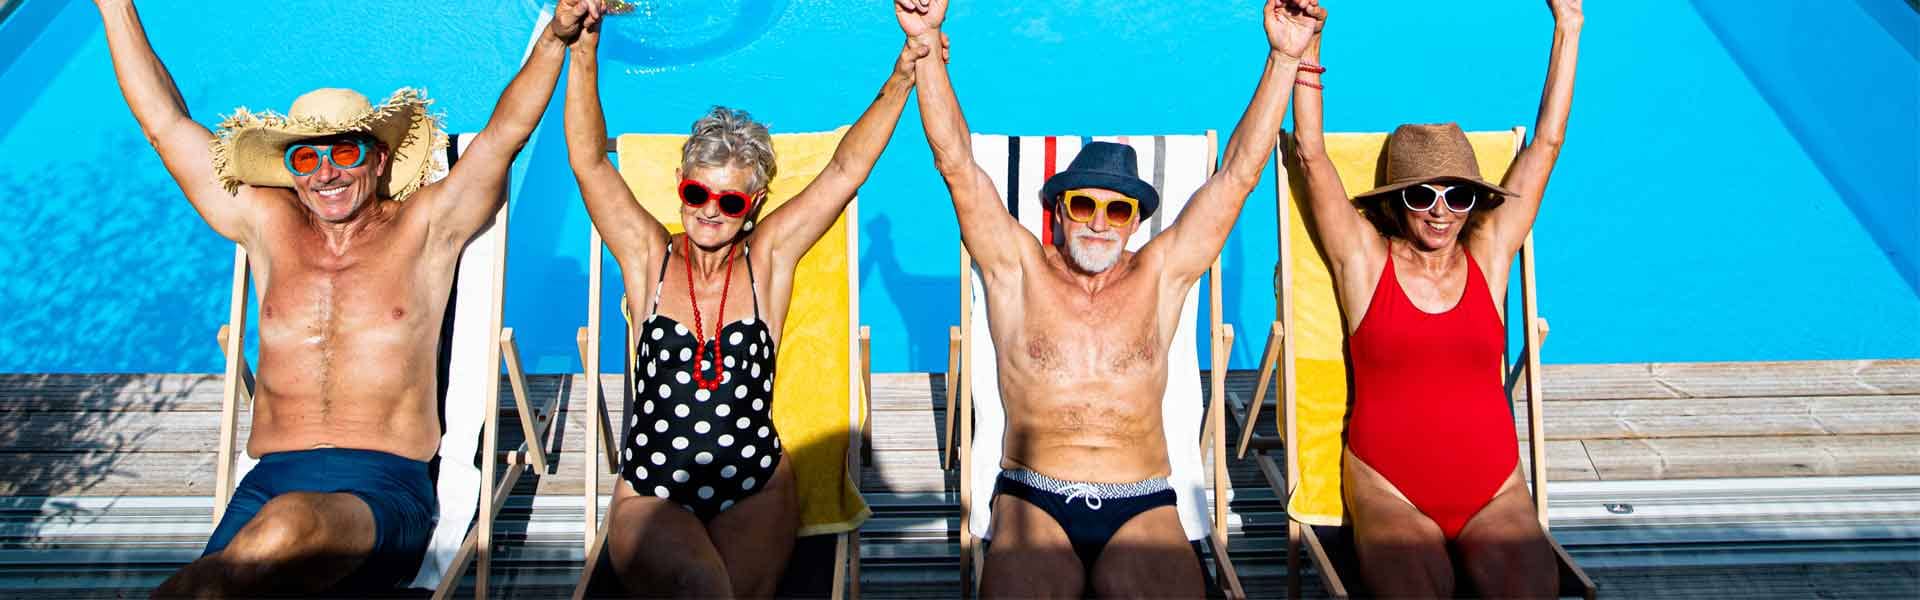 Older People at the Pool